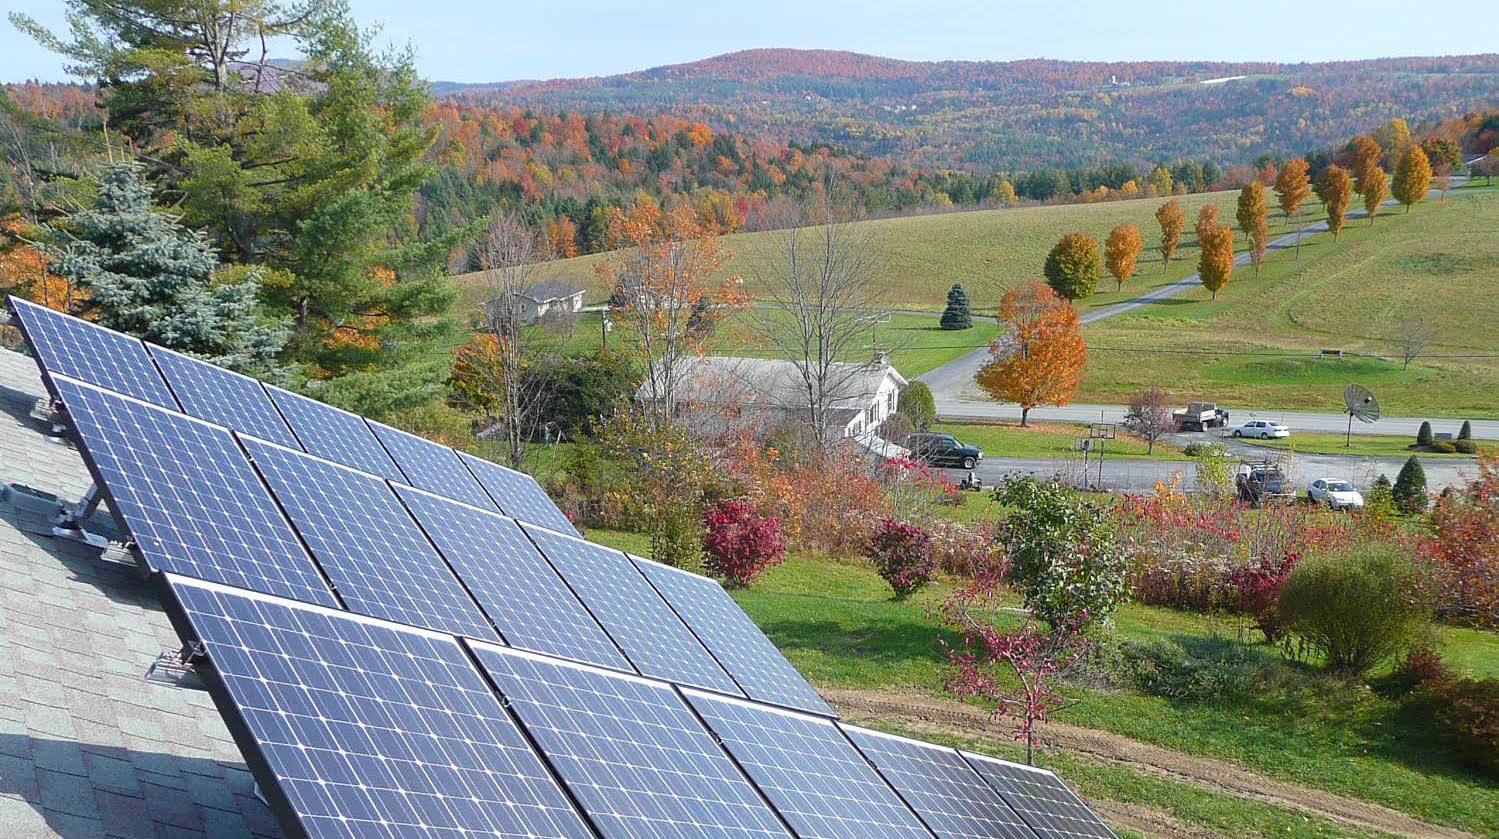 Solar panels on roof looking over open fields in the mountains of Vermont. Solar Panels were installed by Building Energy.